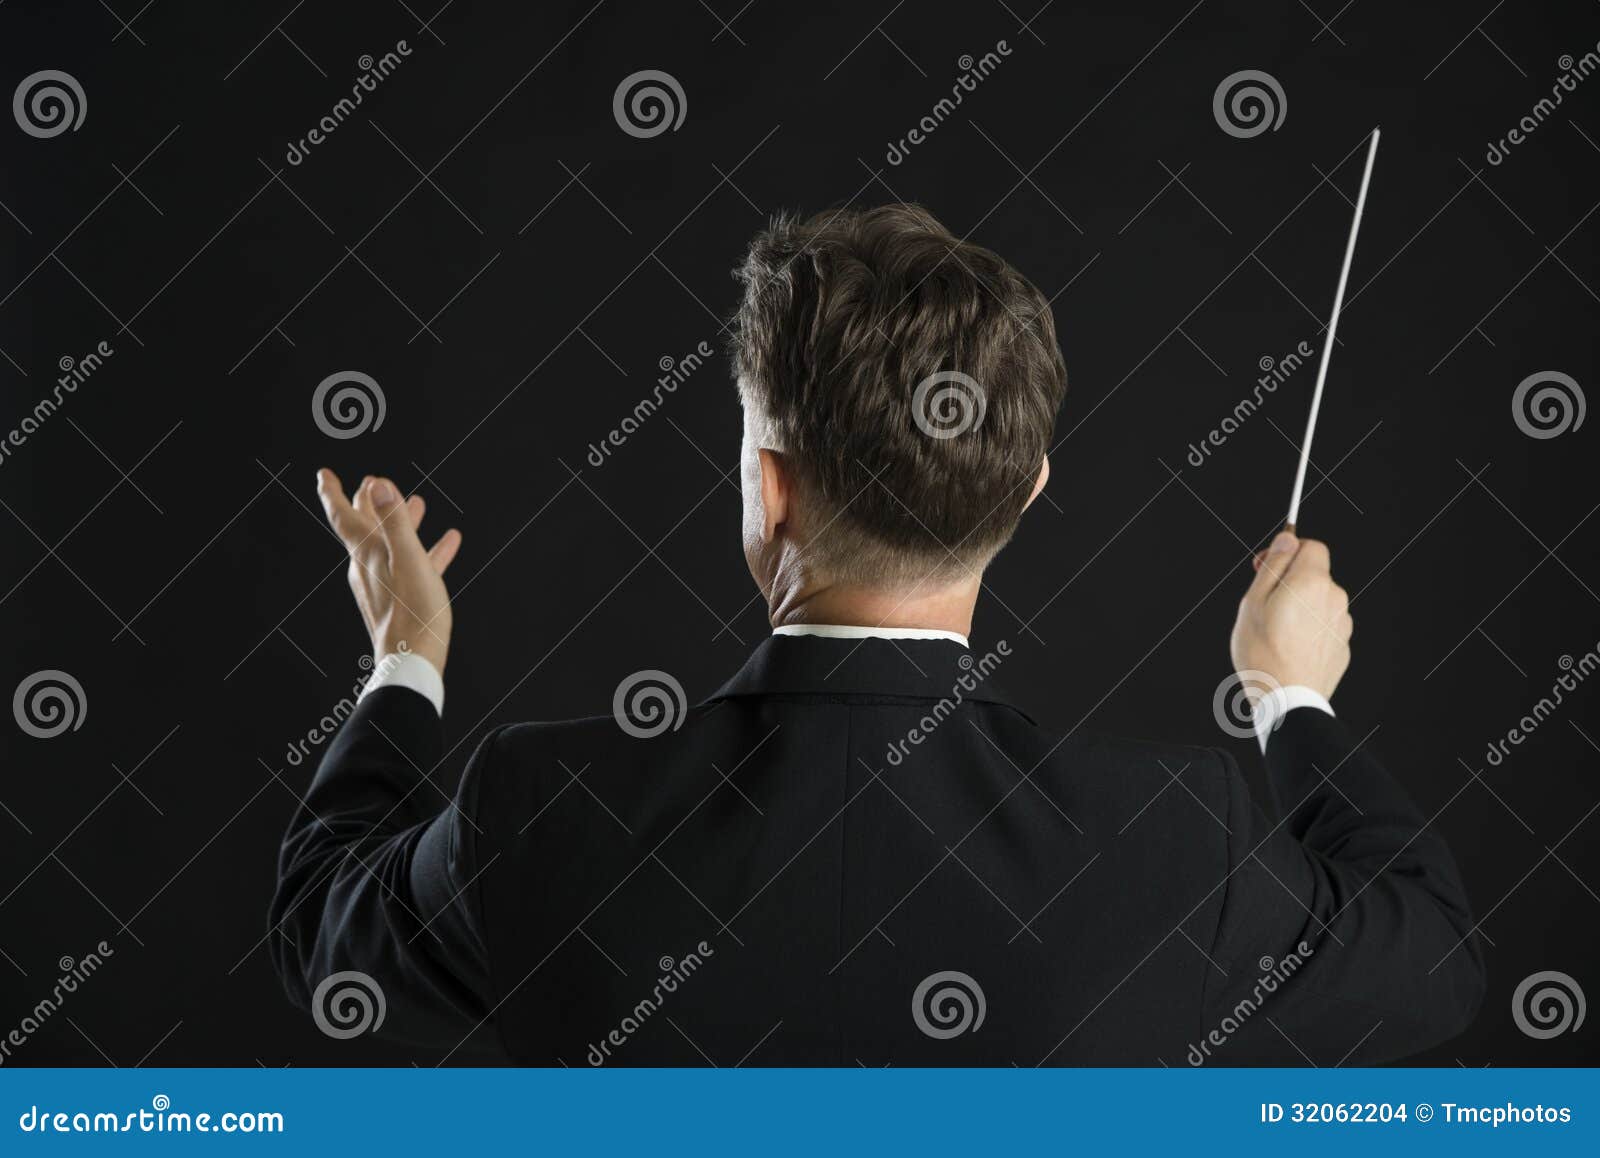 male music conductor directing with his baton